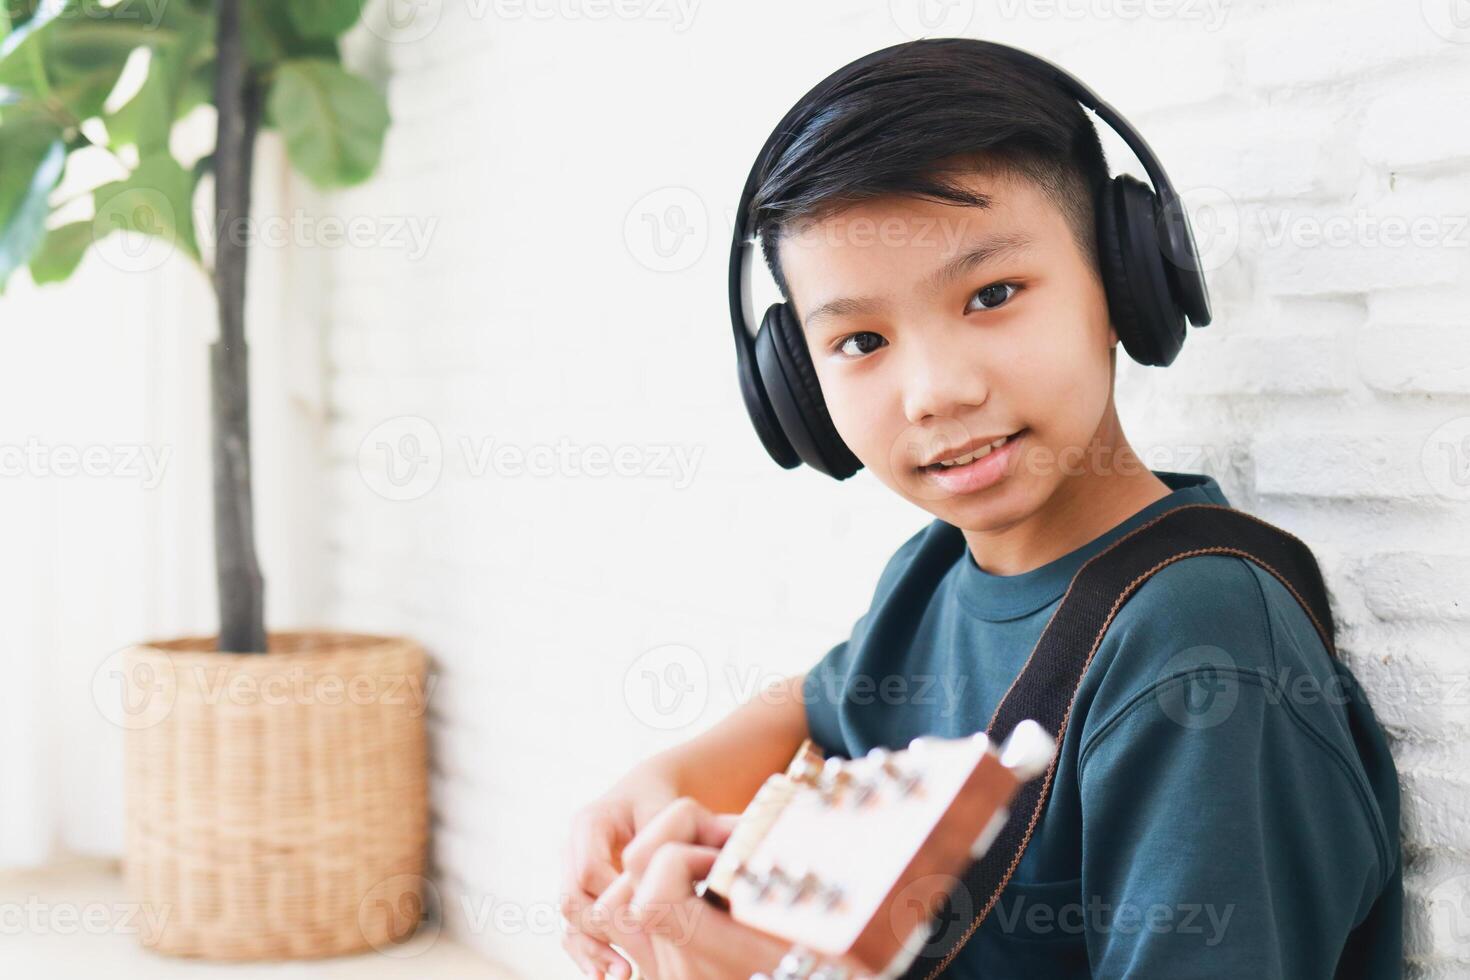 Asian boy wearing headphones with black music Sit and play guitar in the house. music learning concept, music proficiency training photo